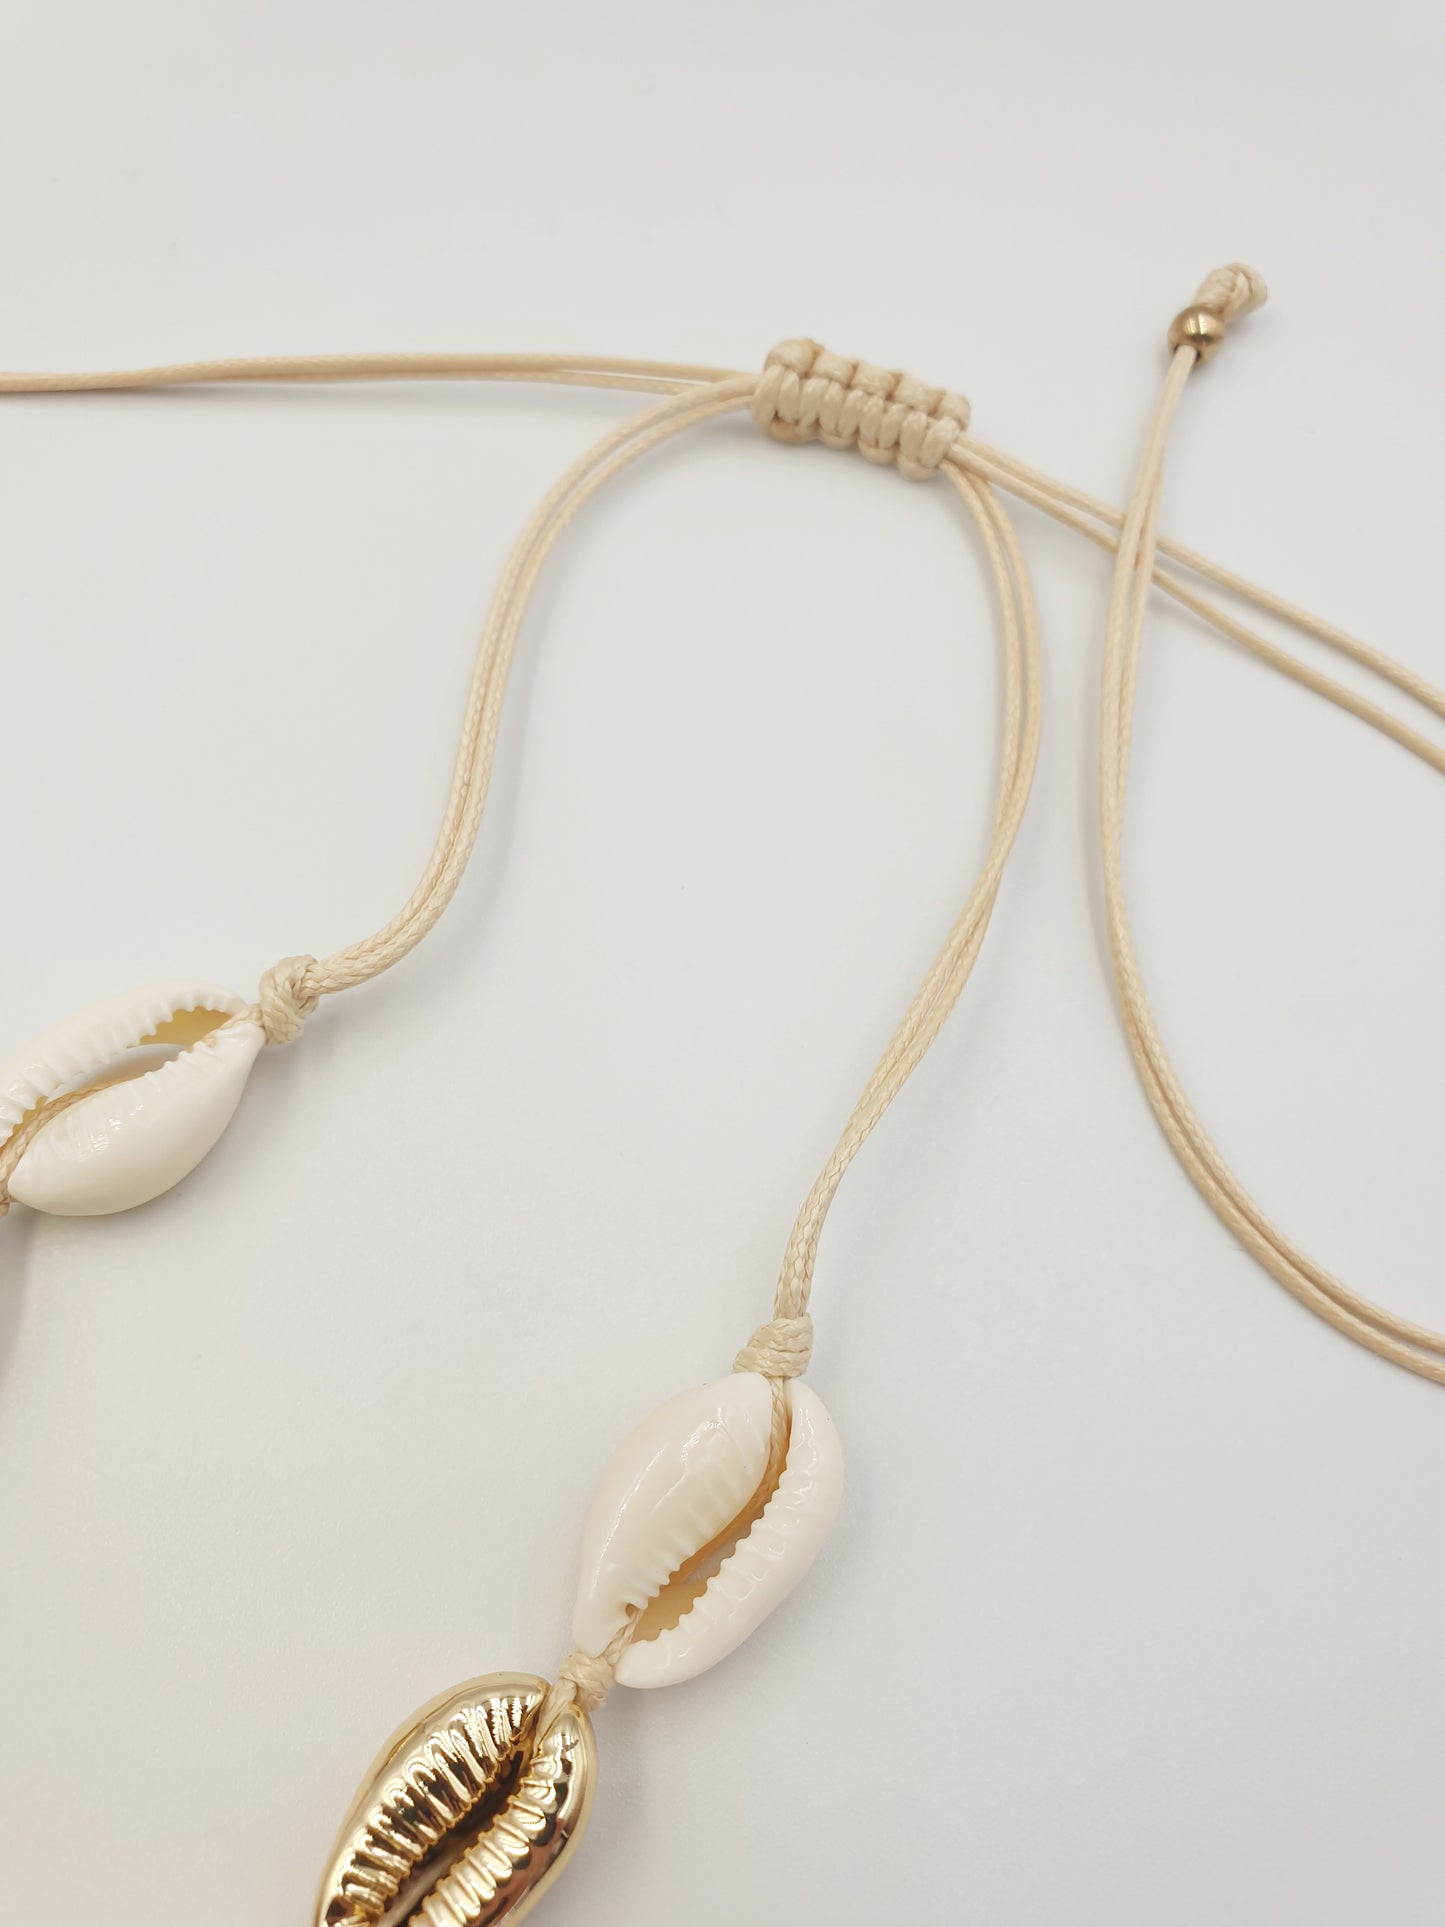 Cowrie Sea Shell Necklace - Beige and Gold